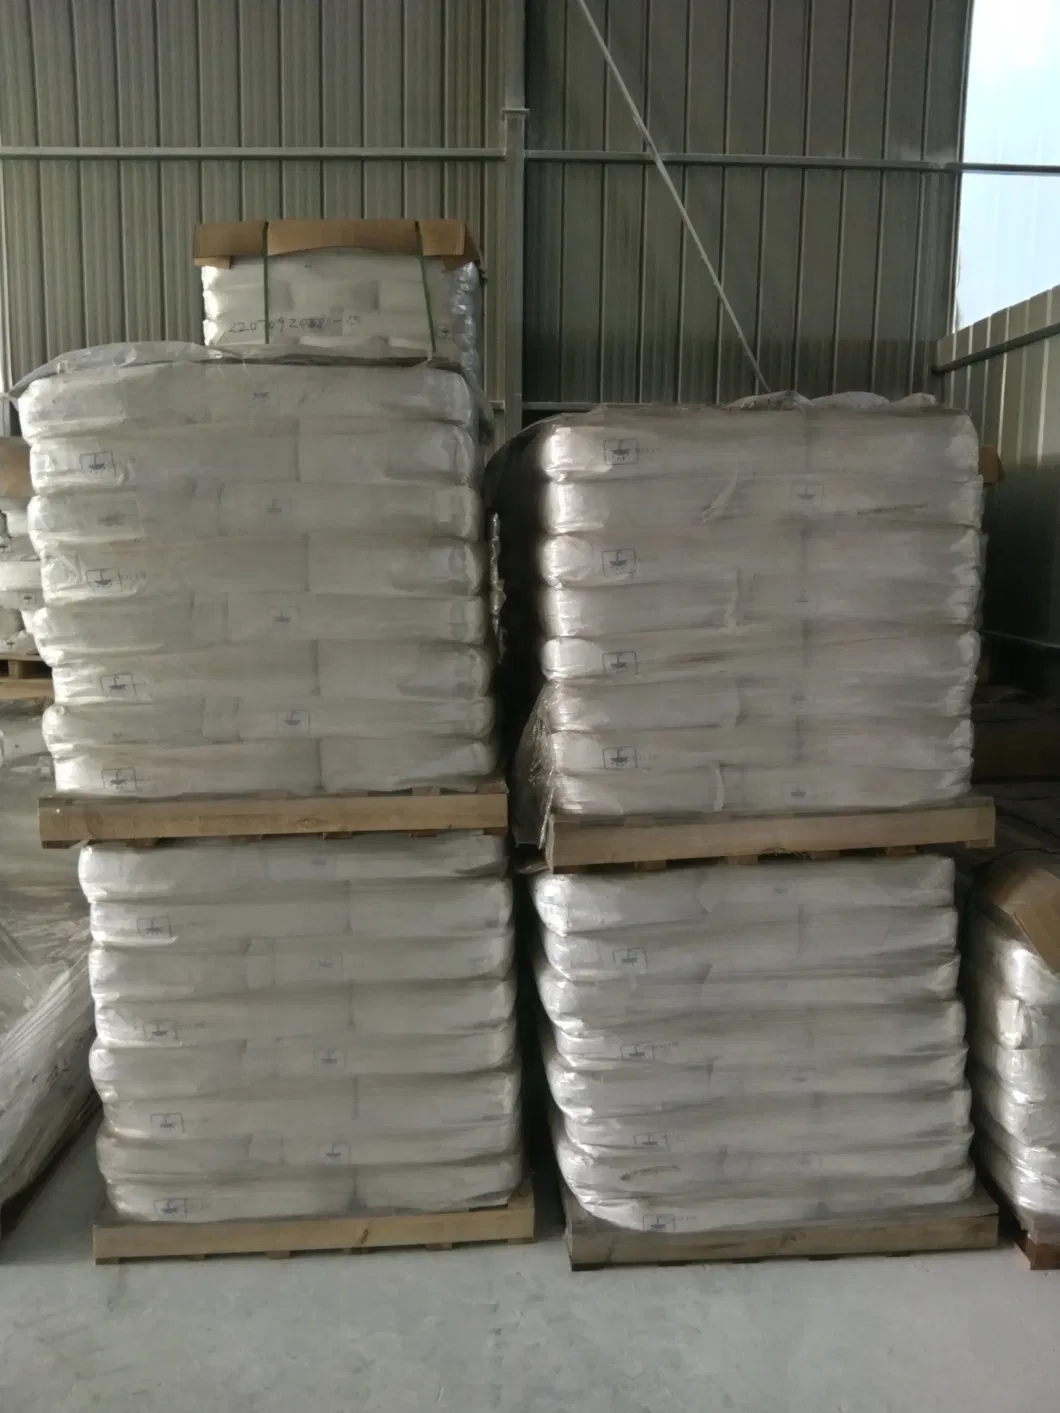 Tr-708 Rutile Titanium Dioxide for Painting/Coating/Ink/Papermaking/Rubber with ISO 9001 and CE CAS: 13463-67-7